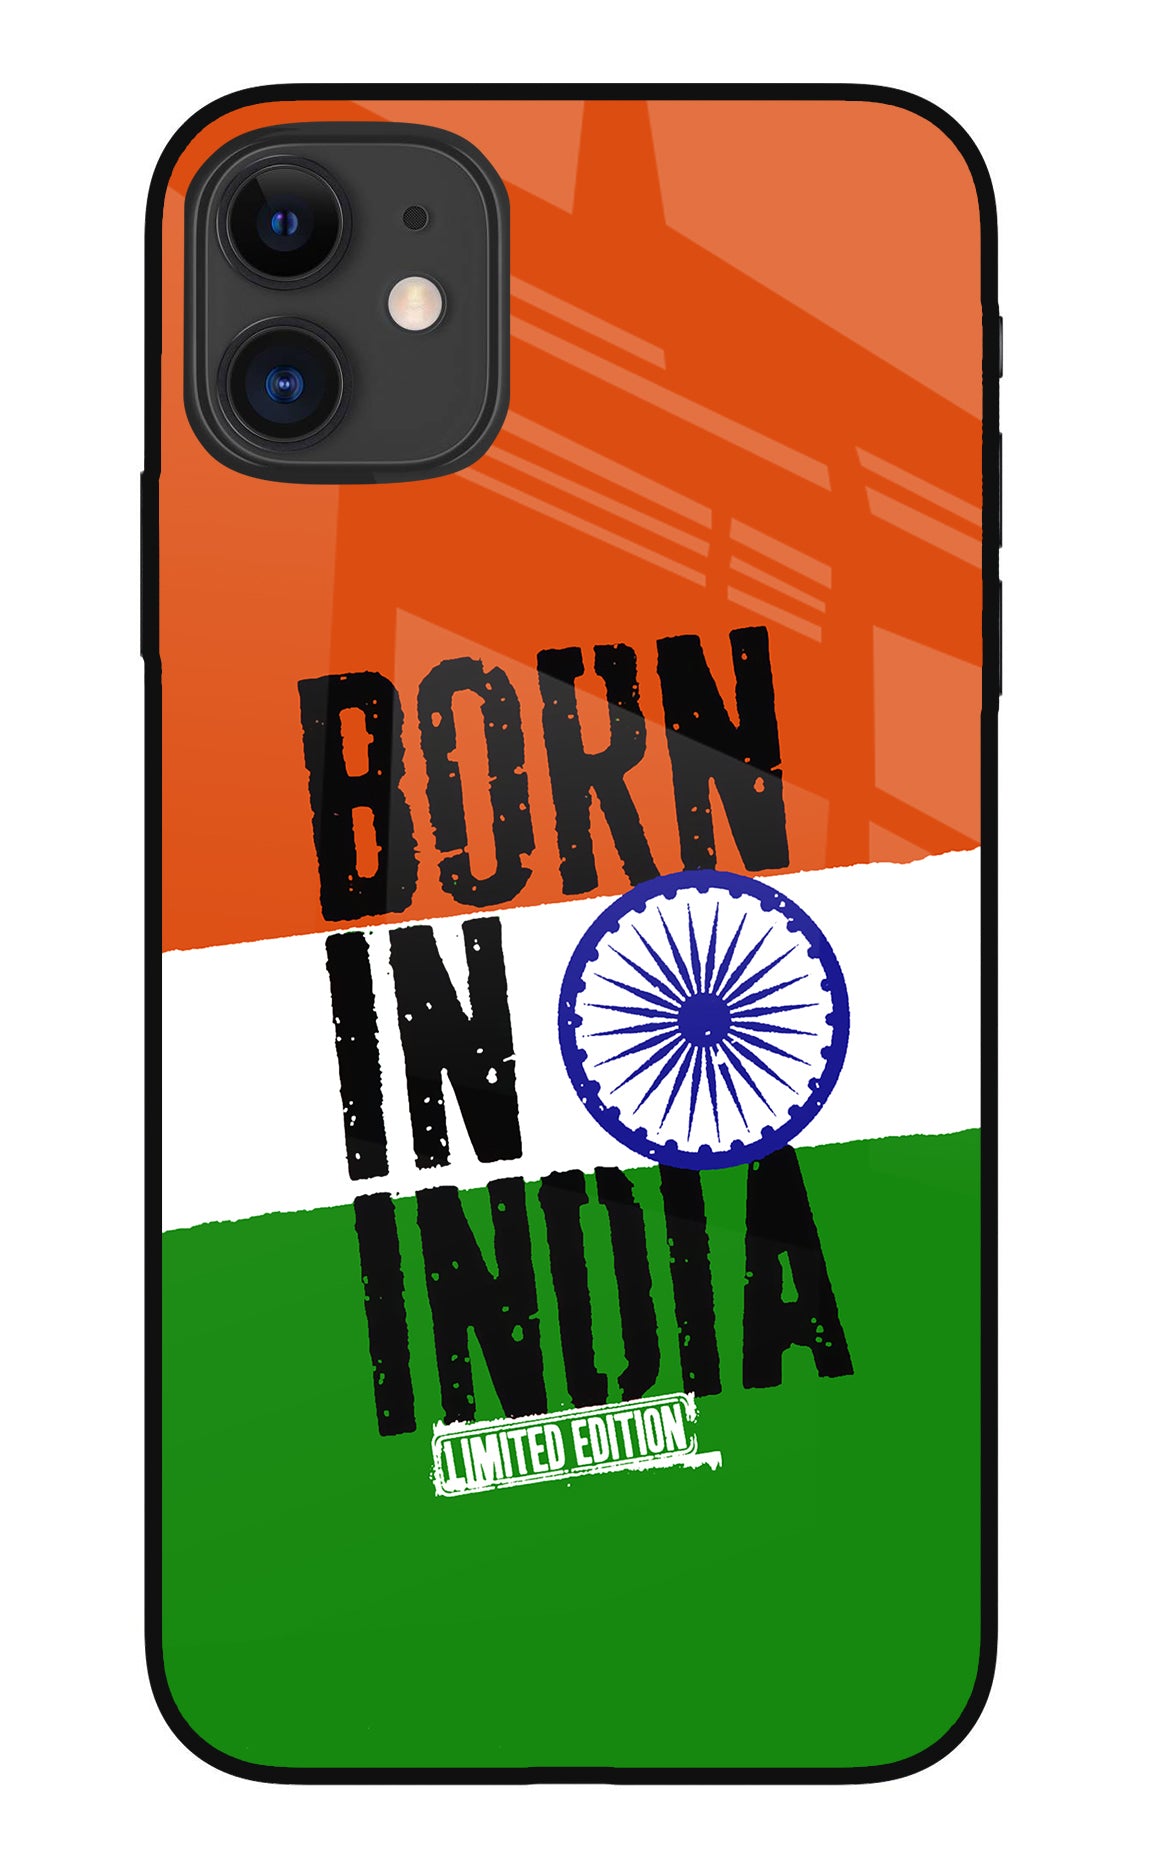 Born in India iPhone 11 Back Cover